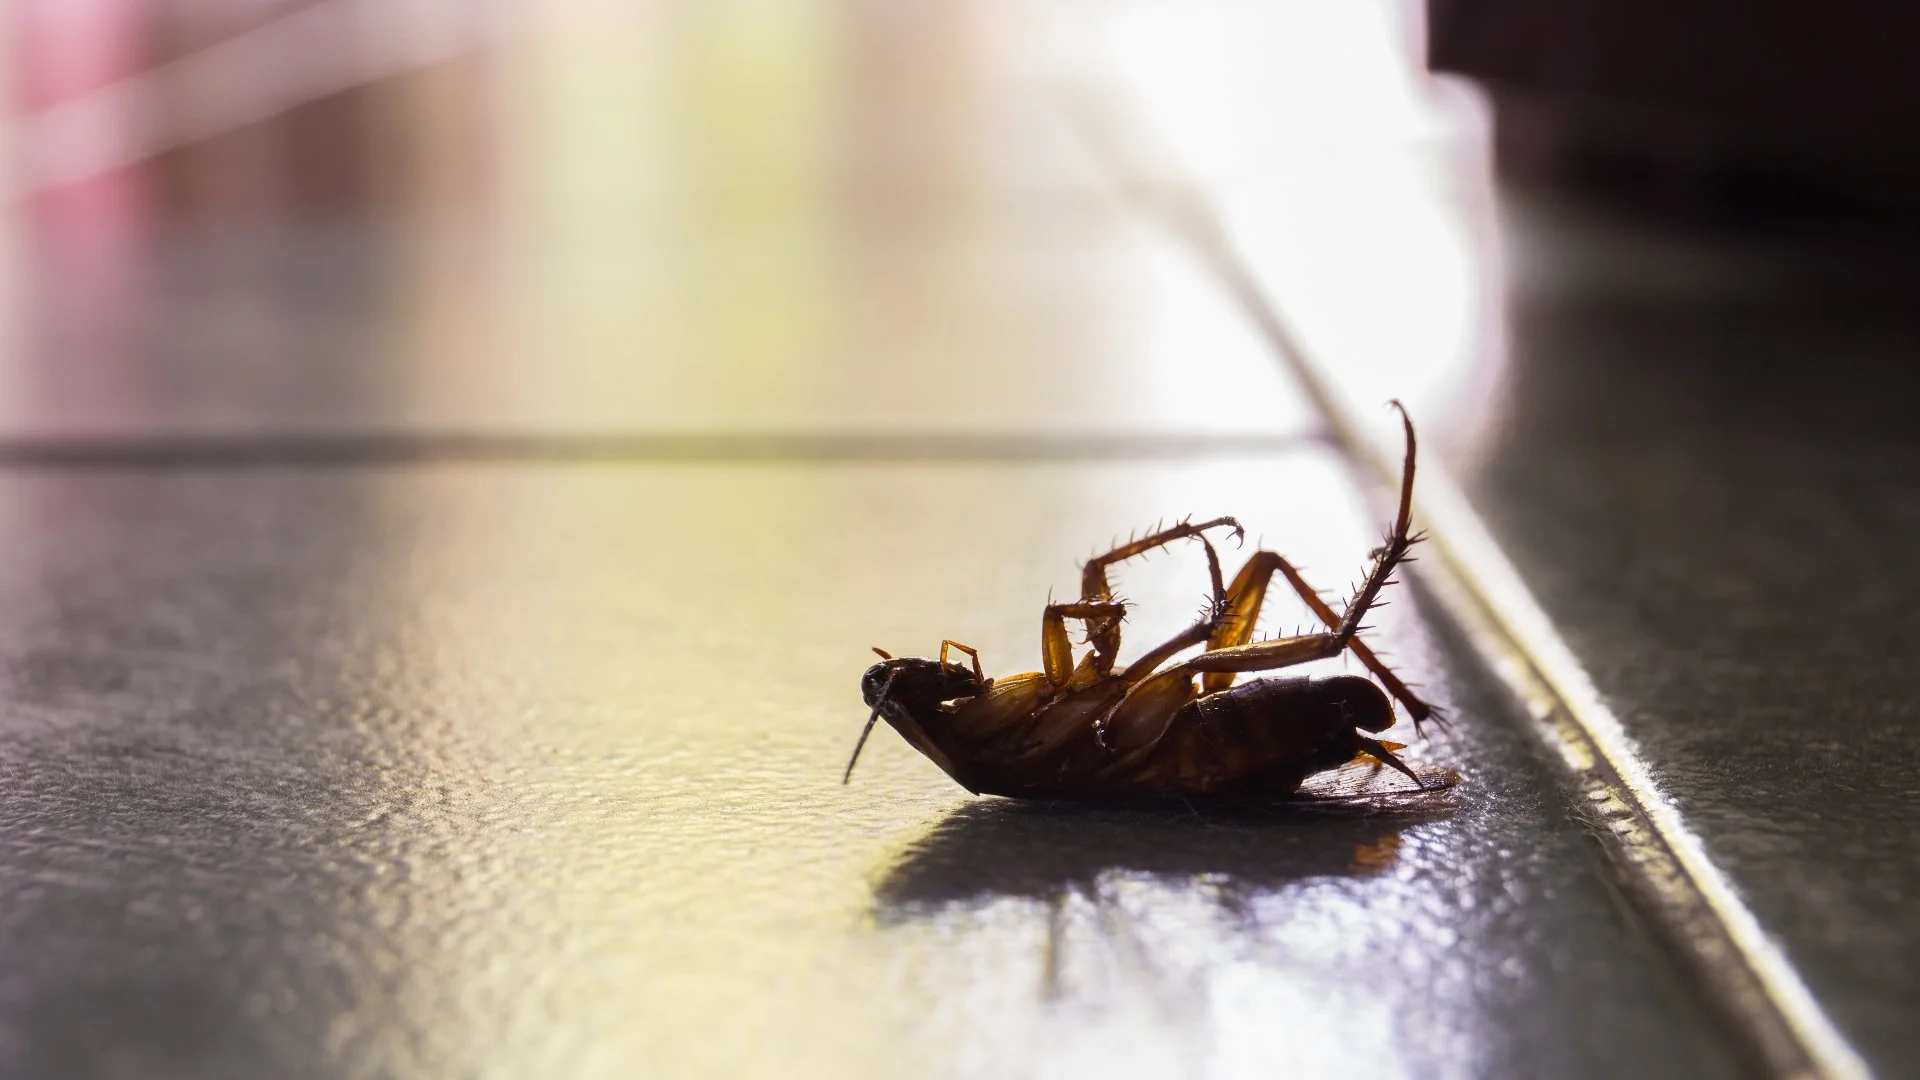 Professional Perimeter Pest Control - Worth It or a Waste of Money?